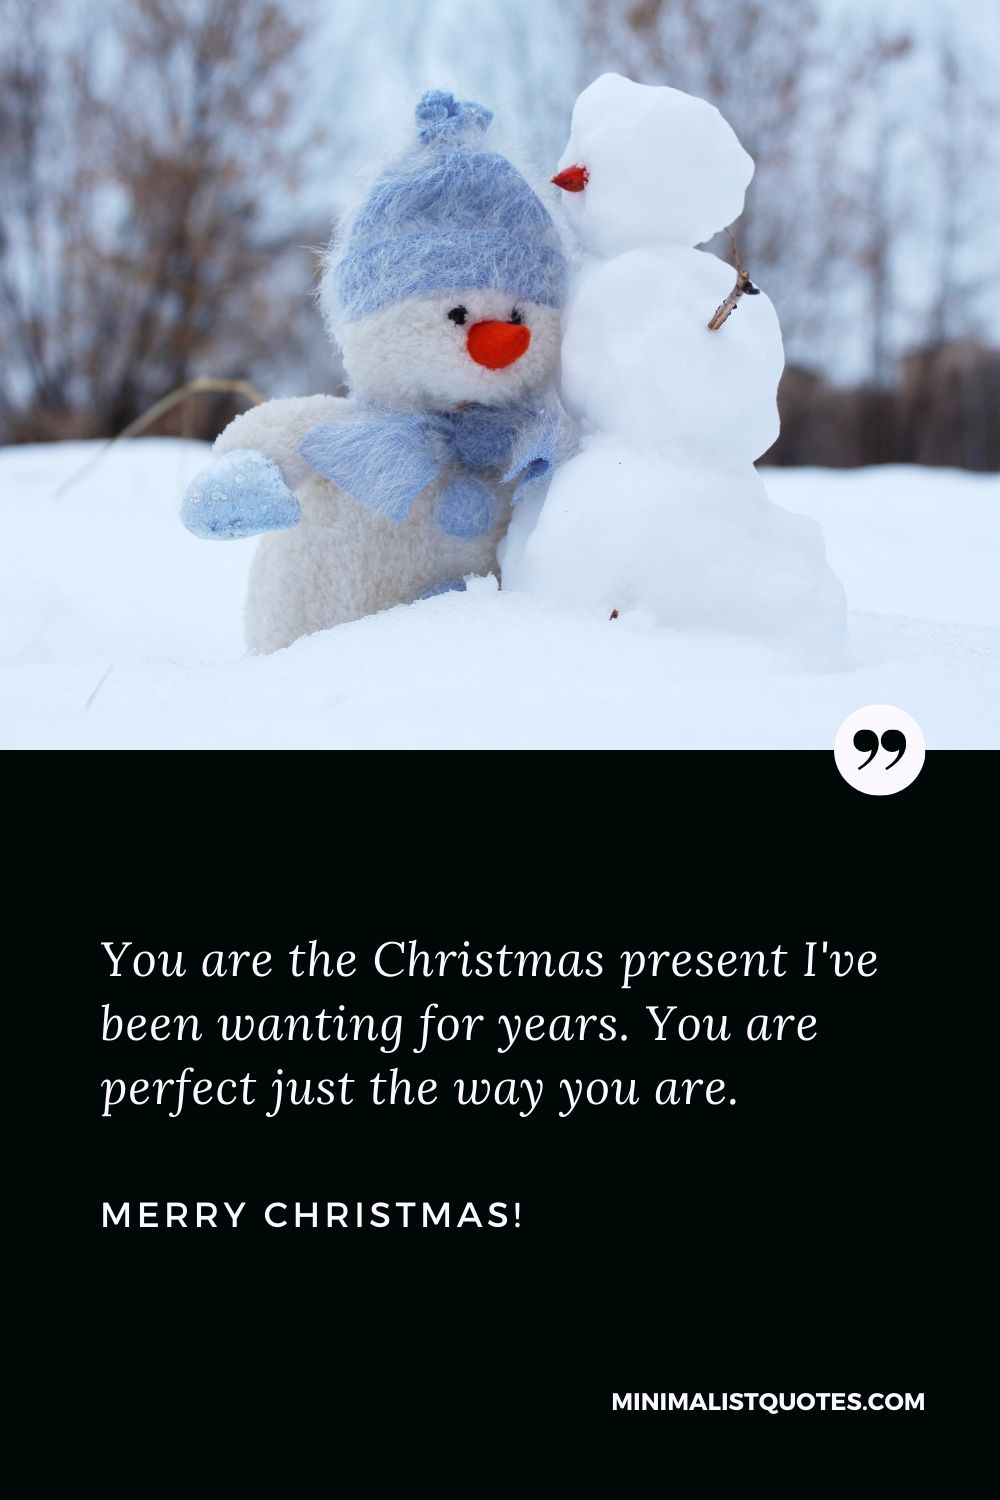 Christmas love quotes: You are the Christmas present I've been wanting for years. You are perfect just the way you are. Merry Christmas!